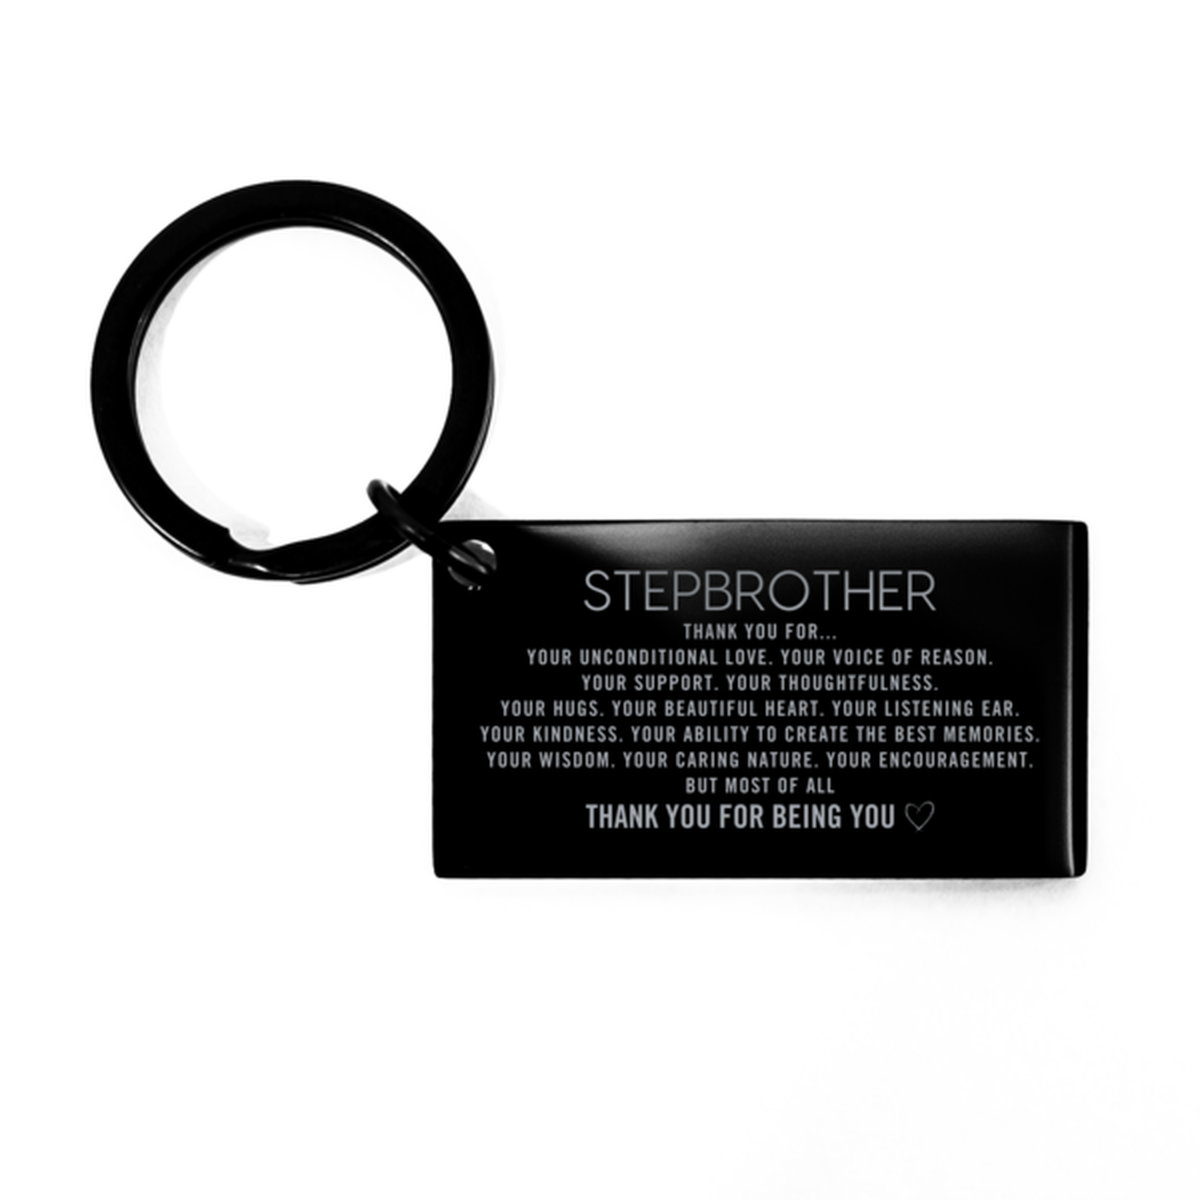 Stepbrother Keychain Custom, Engraved Gifts For Stepbrother Christmas Graduation Birthday Gifts for Men Women Stepbrother Thank you for Your unconditional love